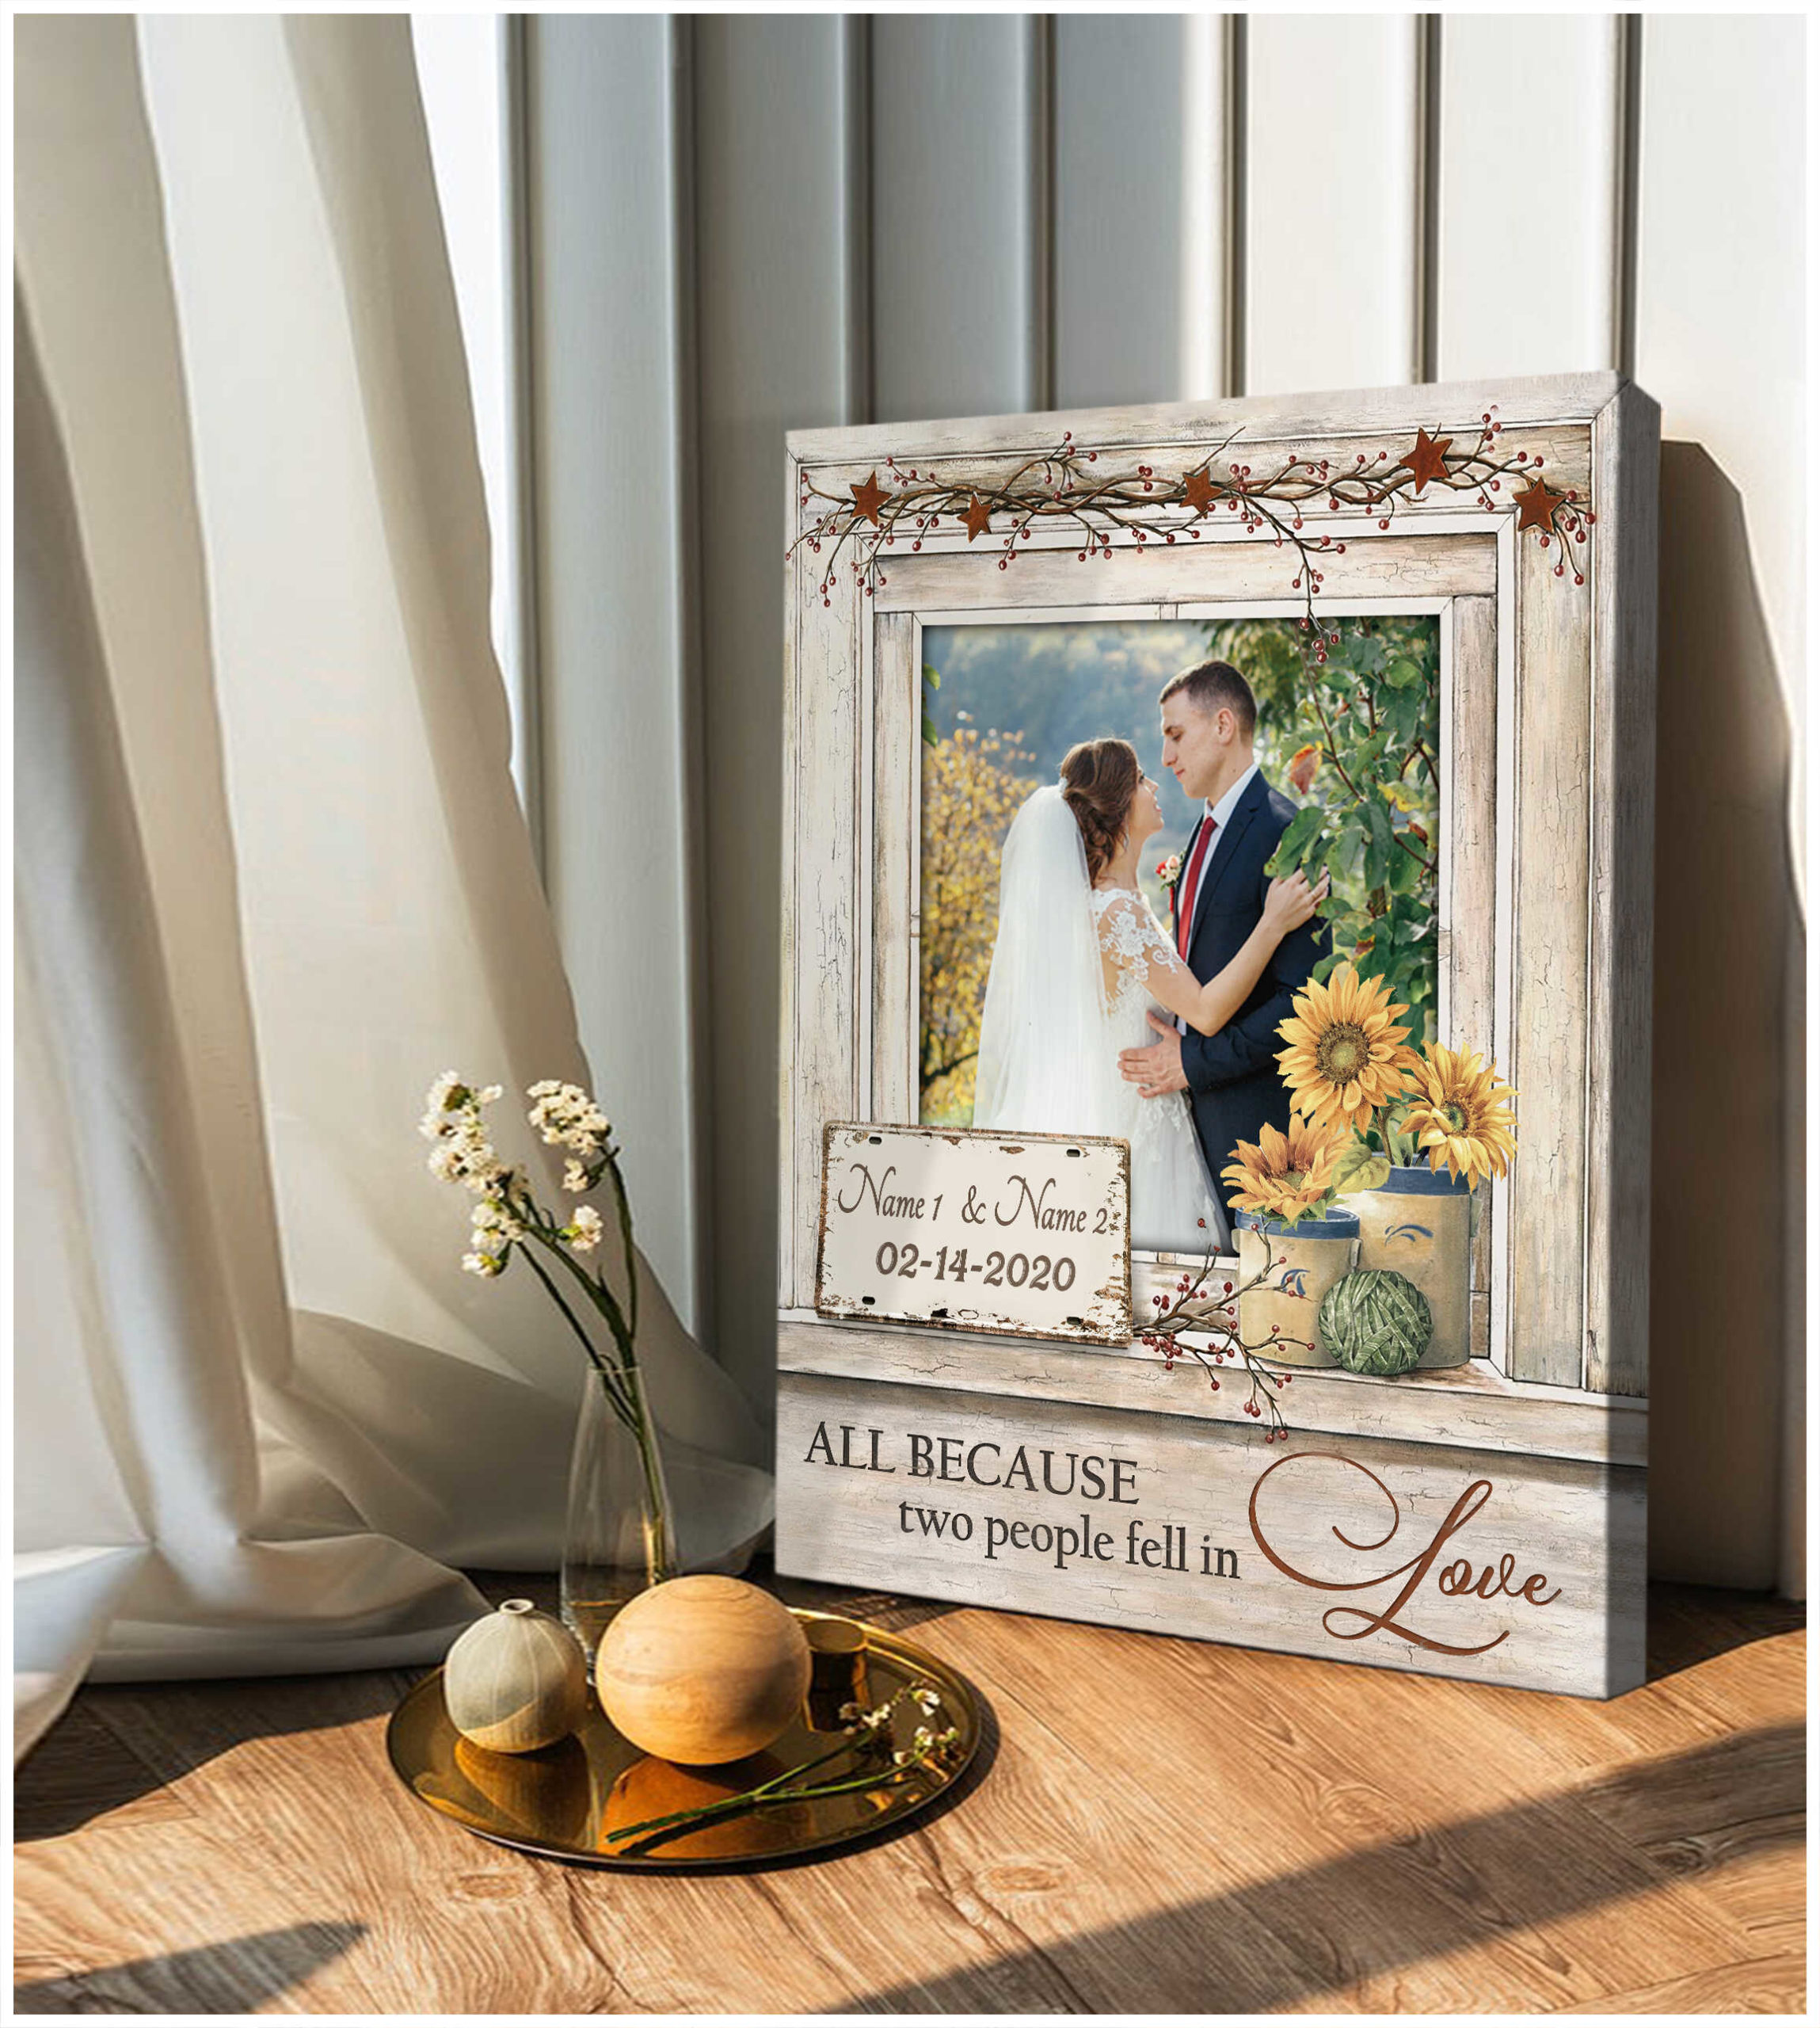 Customized Wedding Anniversary Present All People Fell In Love Canvas Print Illustration 4